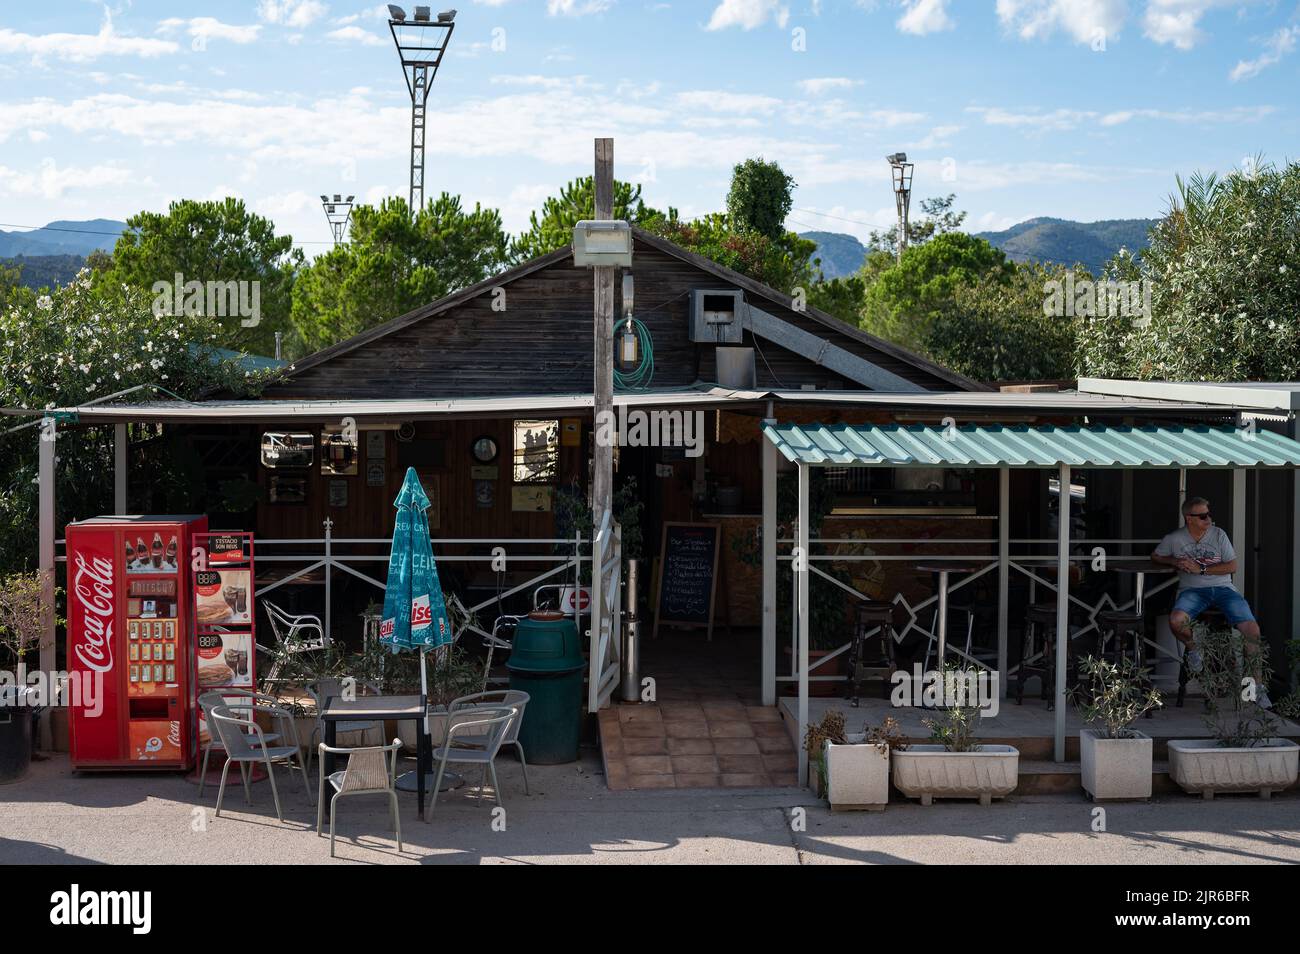 An exterior view of an old roadside bar in the mountainous area in sunny weather Stock Photo